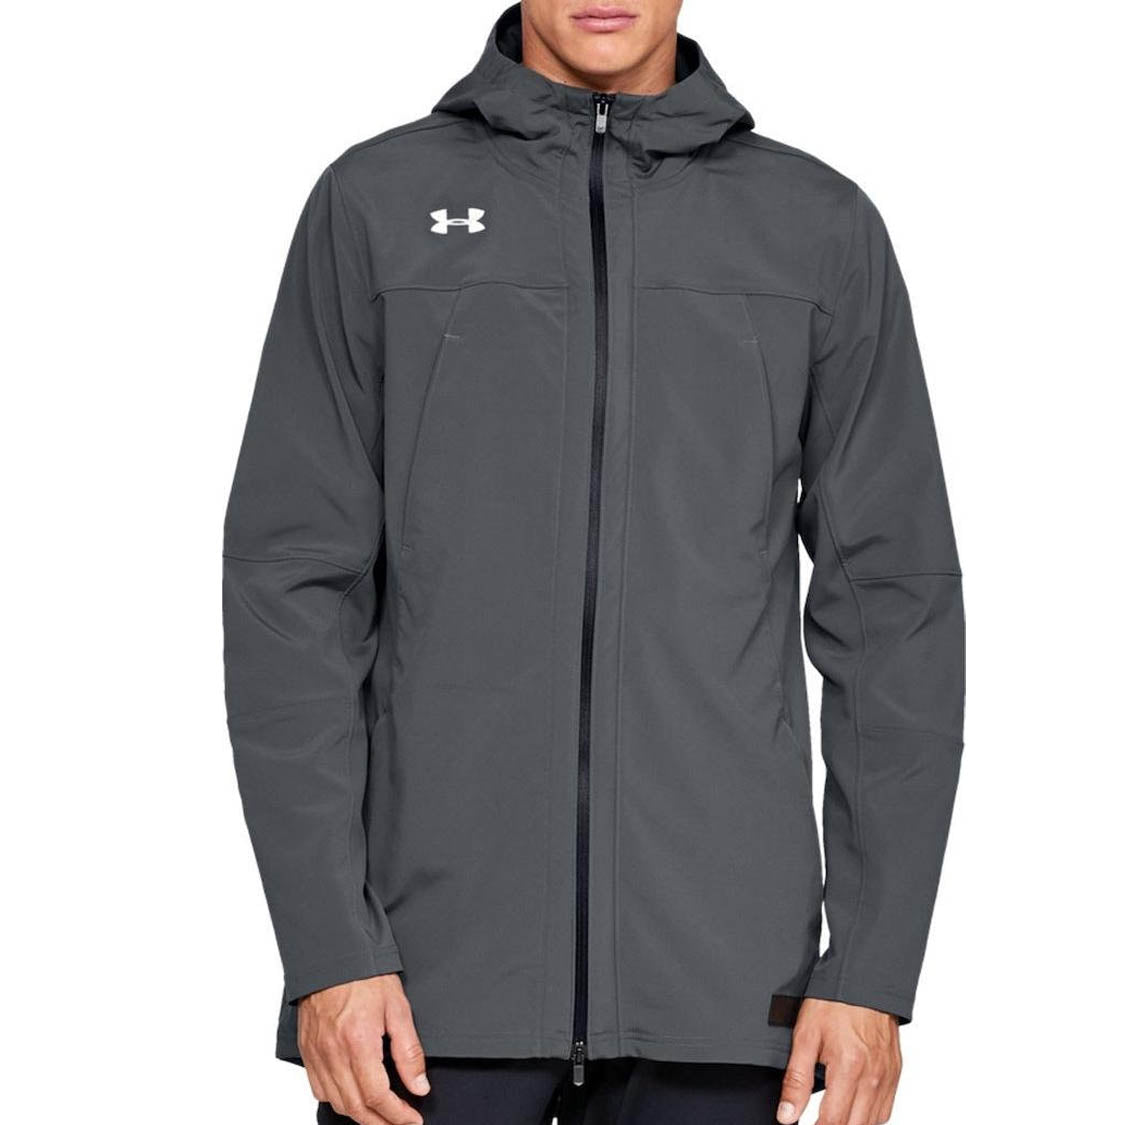 Under Armour Accelerate Terrace Mens Jacket - Grey | FOOTY.COM